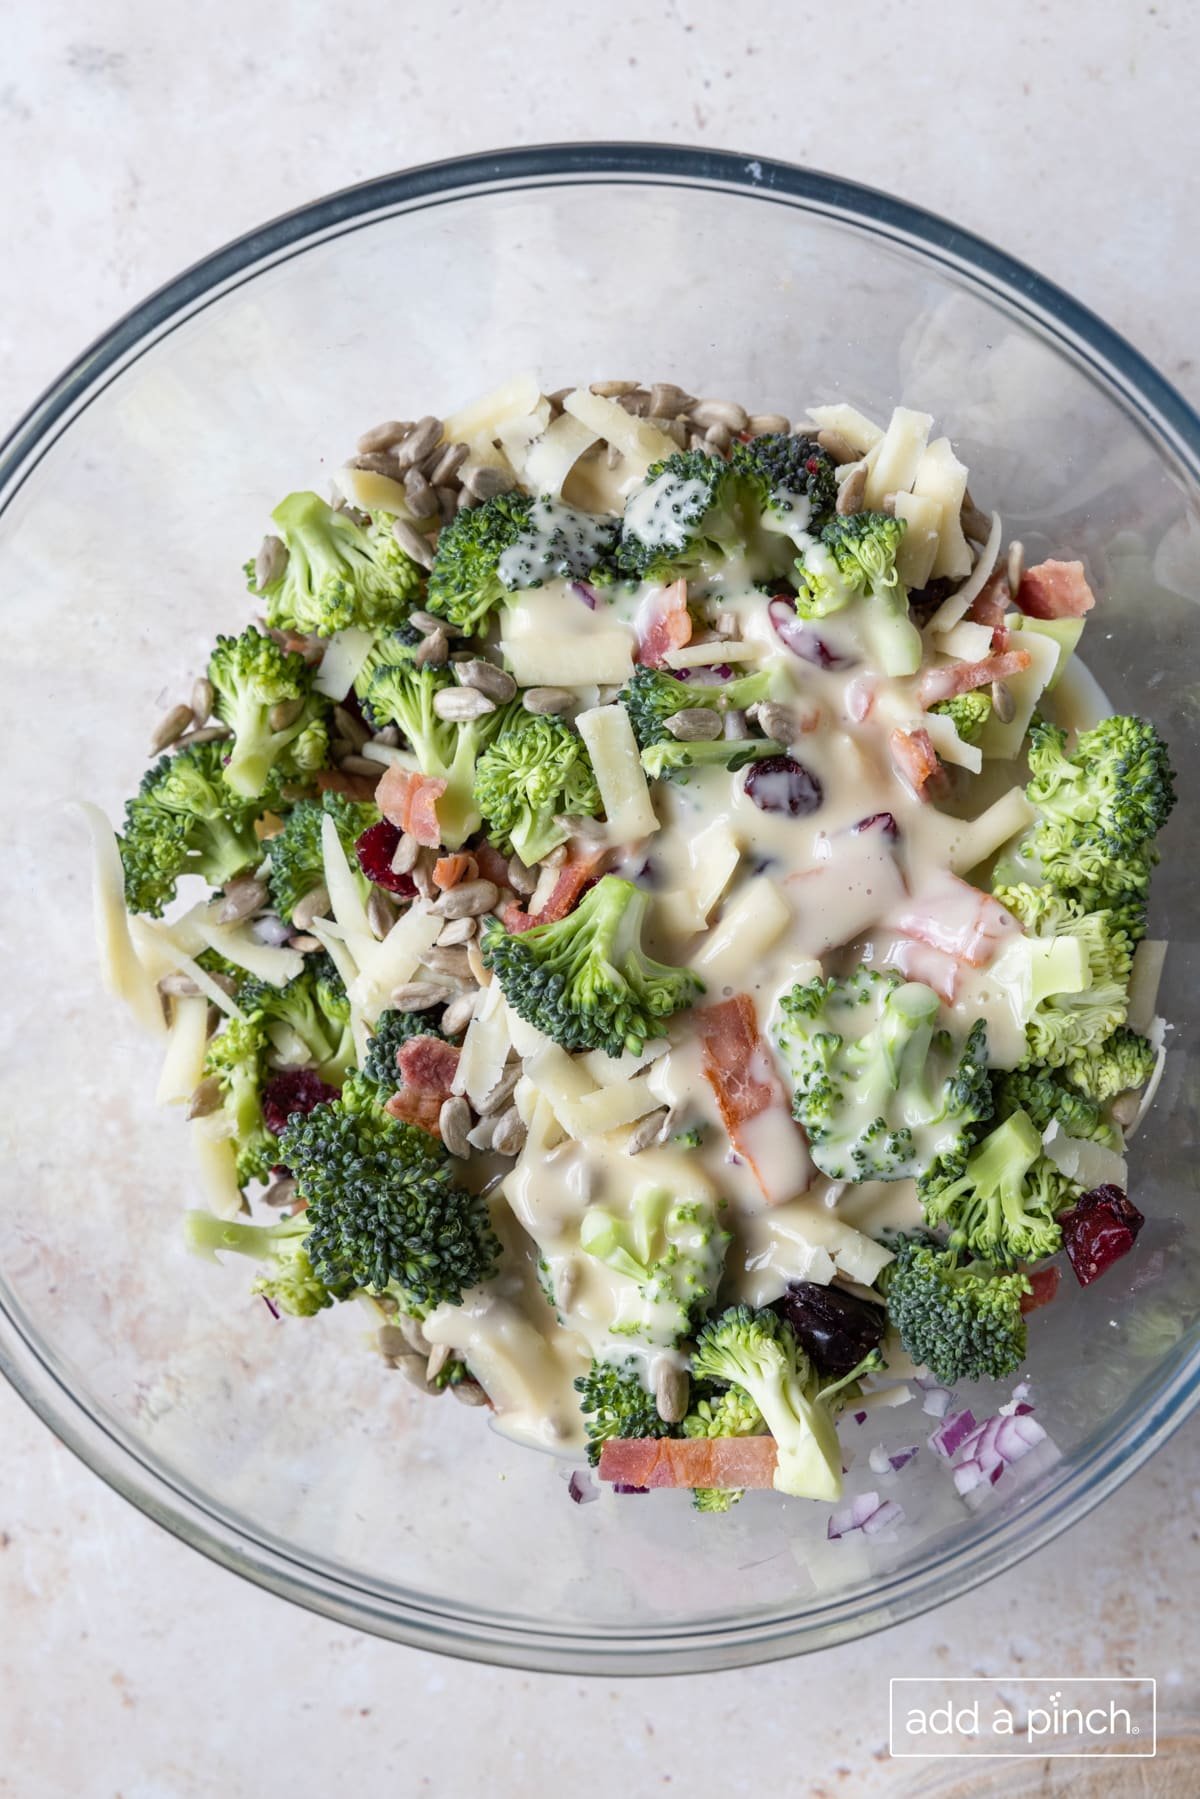 Photo of broccoli salad with homemade dressing added on top.